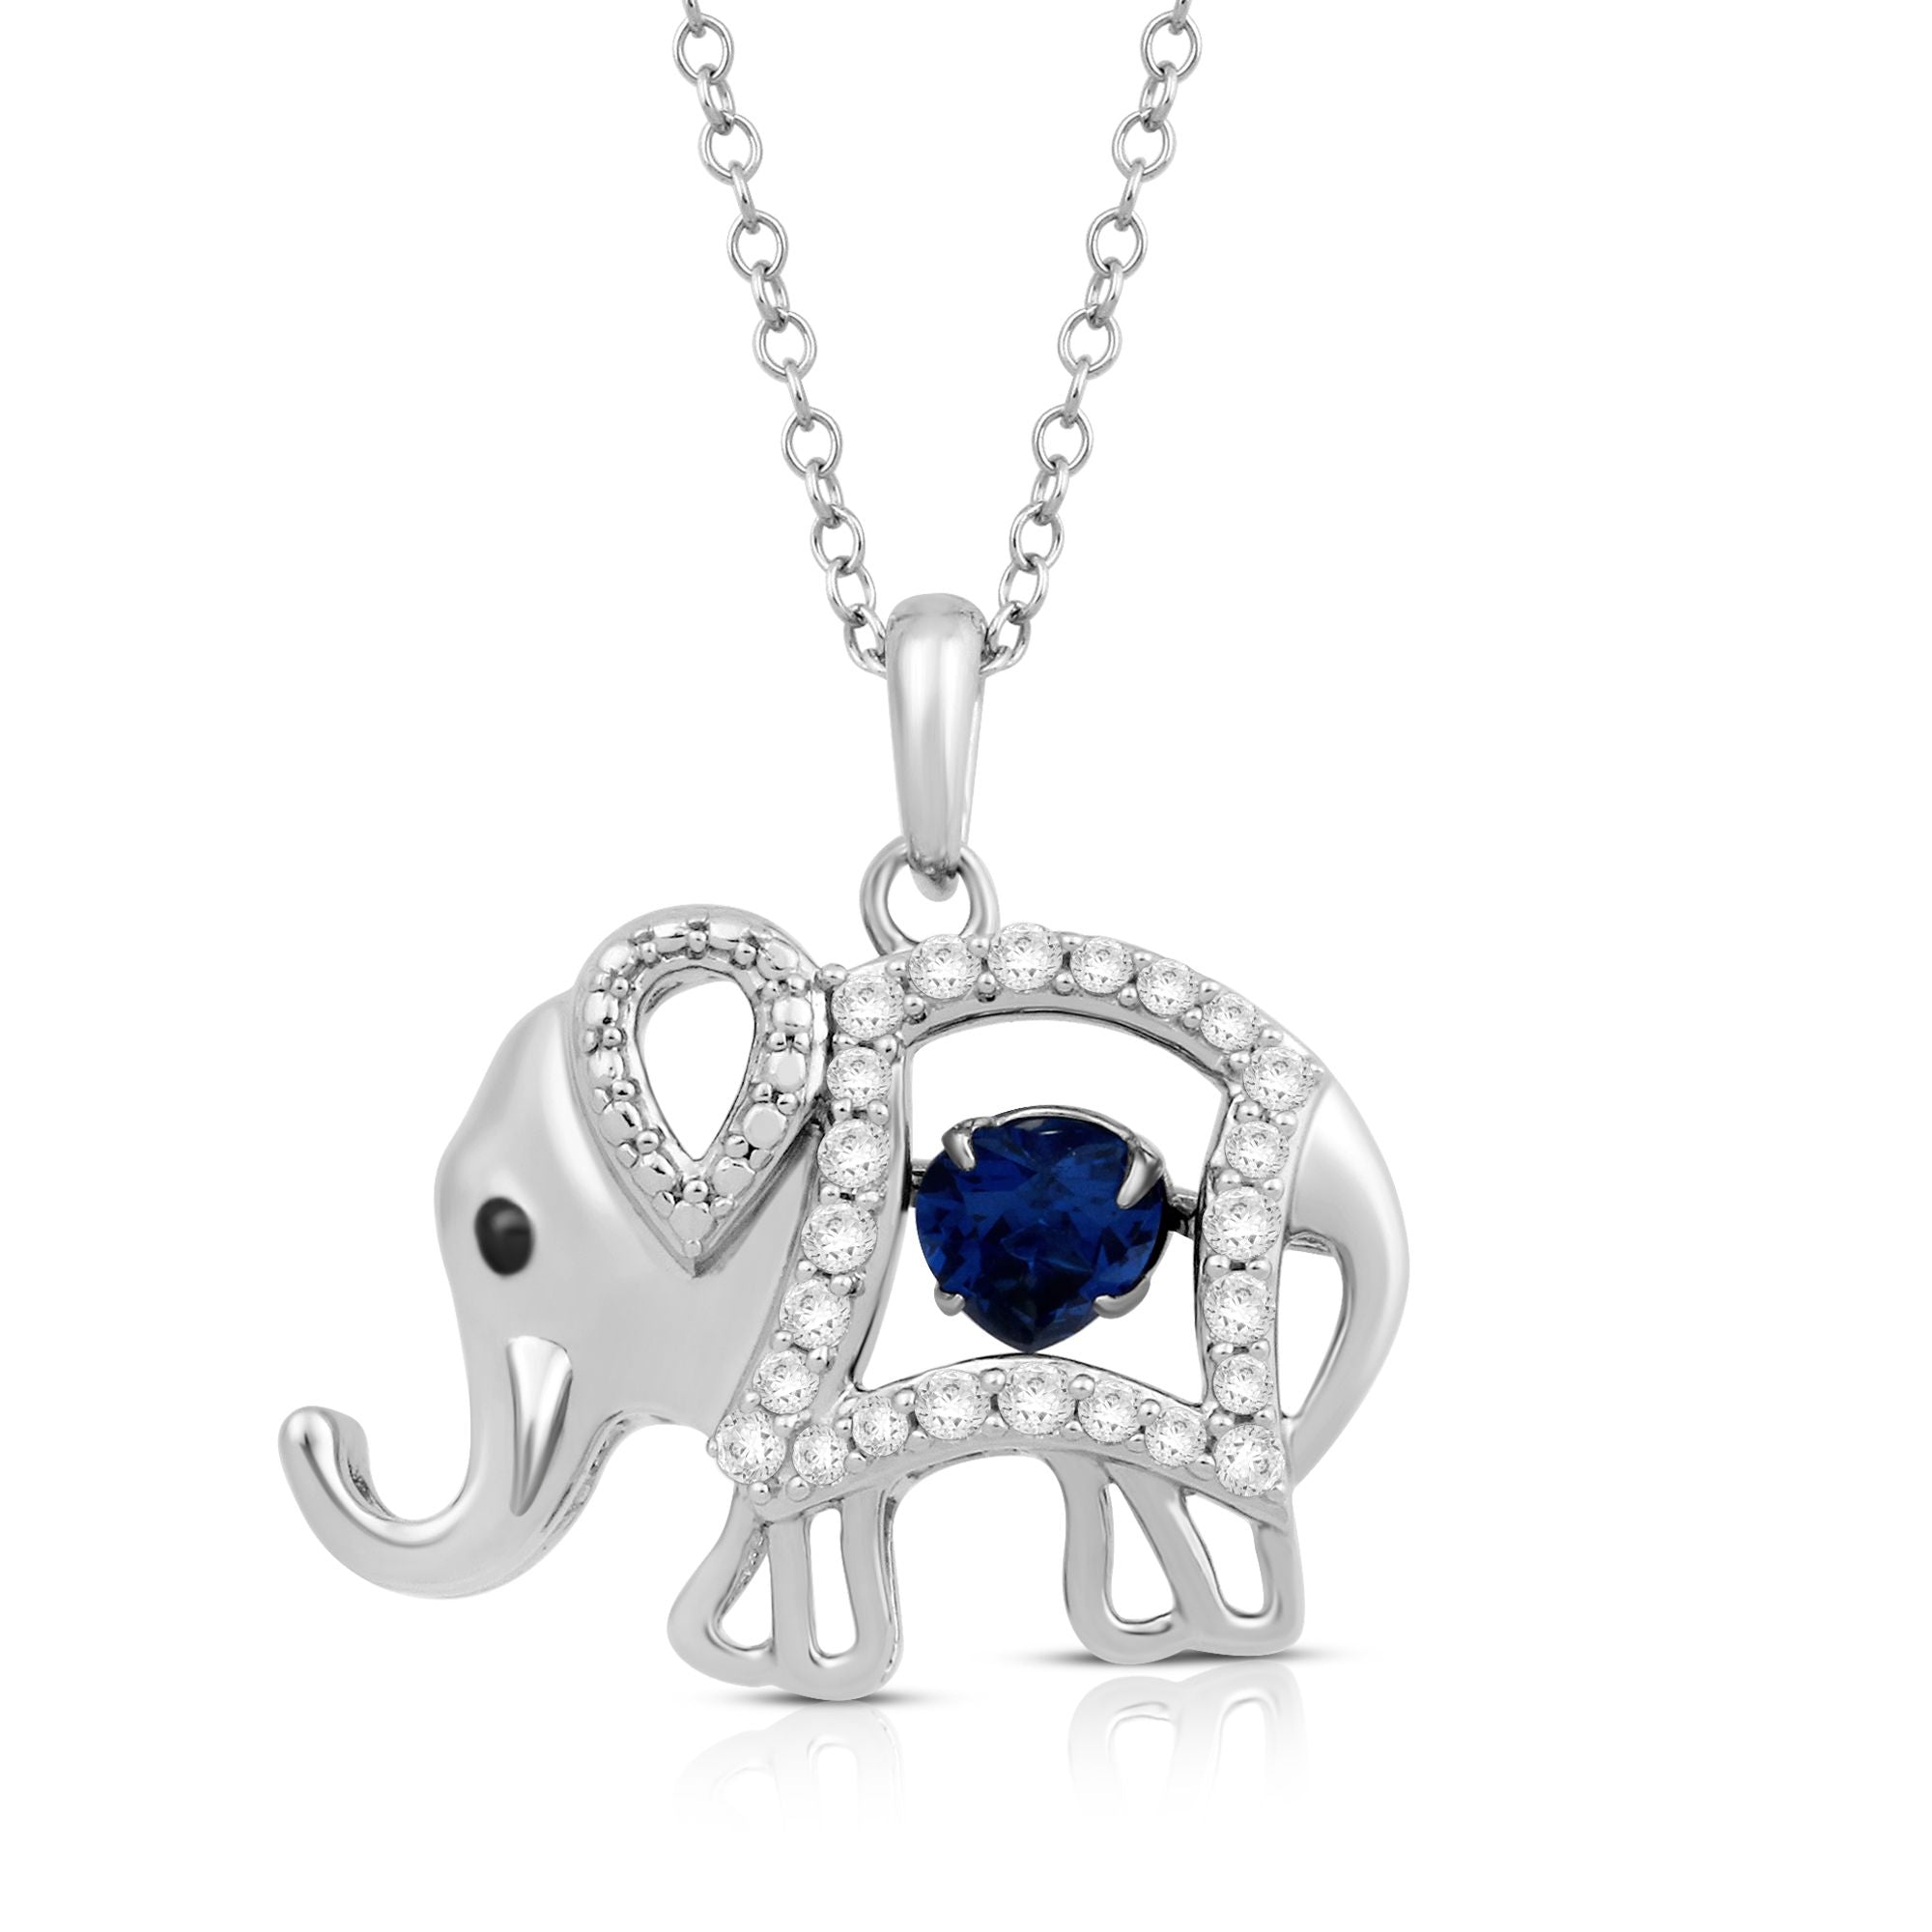 Sterling Silver Elephant Pendant with Turquoise - J.H. Breakell and Co.